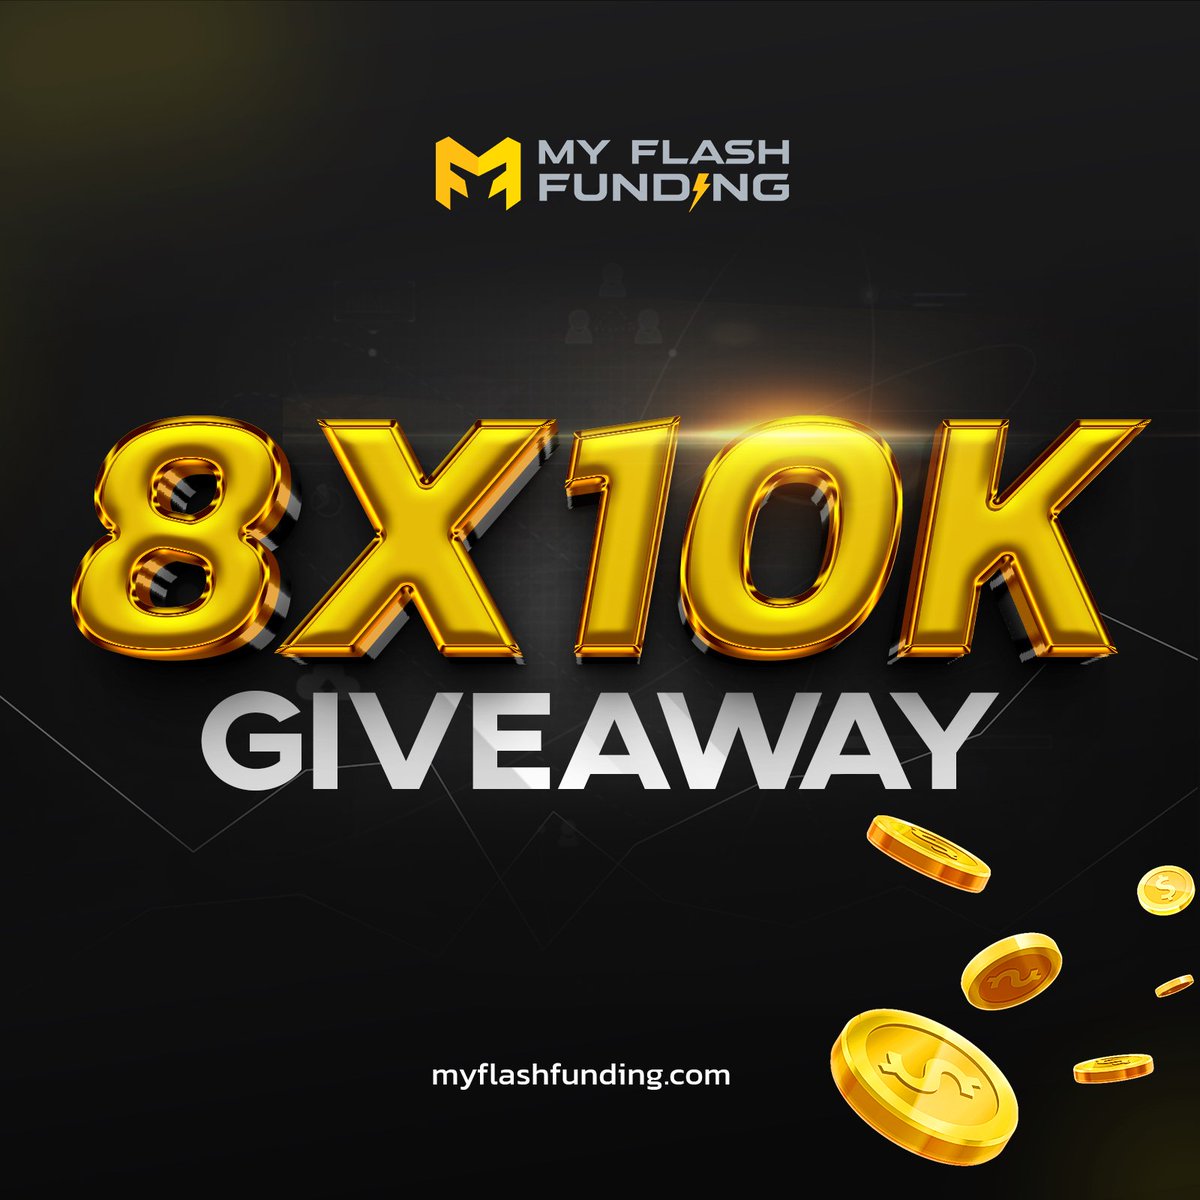 $80,000 GIVEAWAY 🎁✨ (8 X $10,000 Evaluation Accounts) To win: Follow @lex_consults | @myflashfunding | @blakemyff Follow: @AartTheTrader | @Techriztm | @Mide_RichieFx | @Crypt_Therapist • Like & Repost this post. • Tag 3 Traders to join. Winners will be announced in